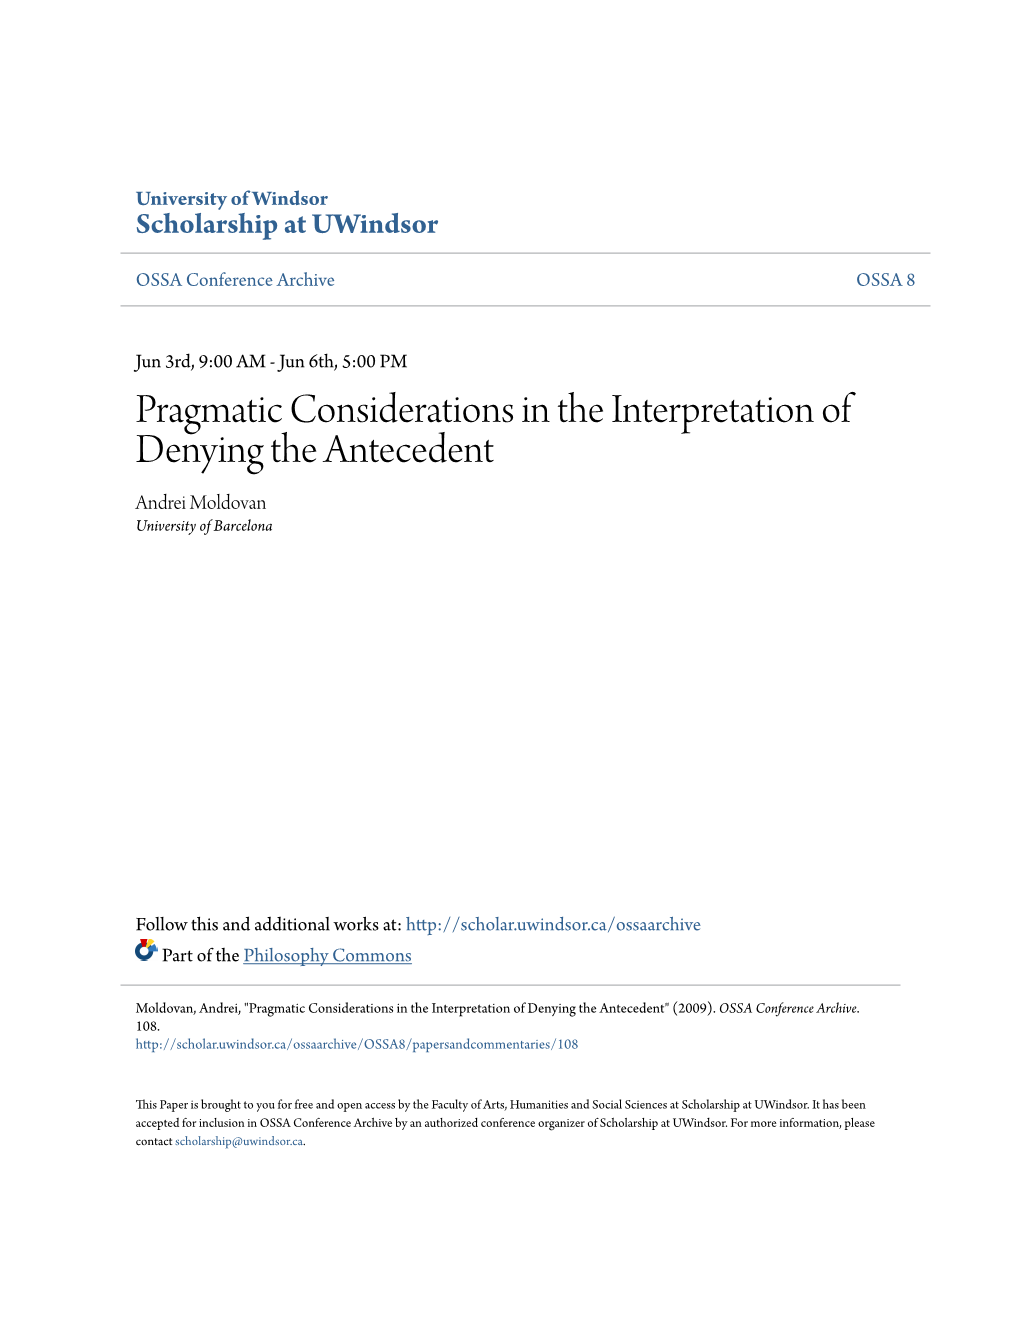 Pragmatic Considerations in the Interpretation of Denying the Antecedent Andrei Moldovan University of Barcelona